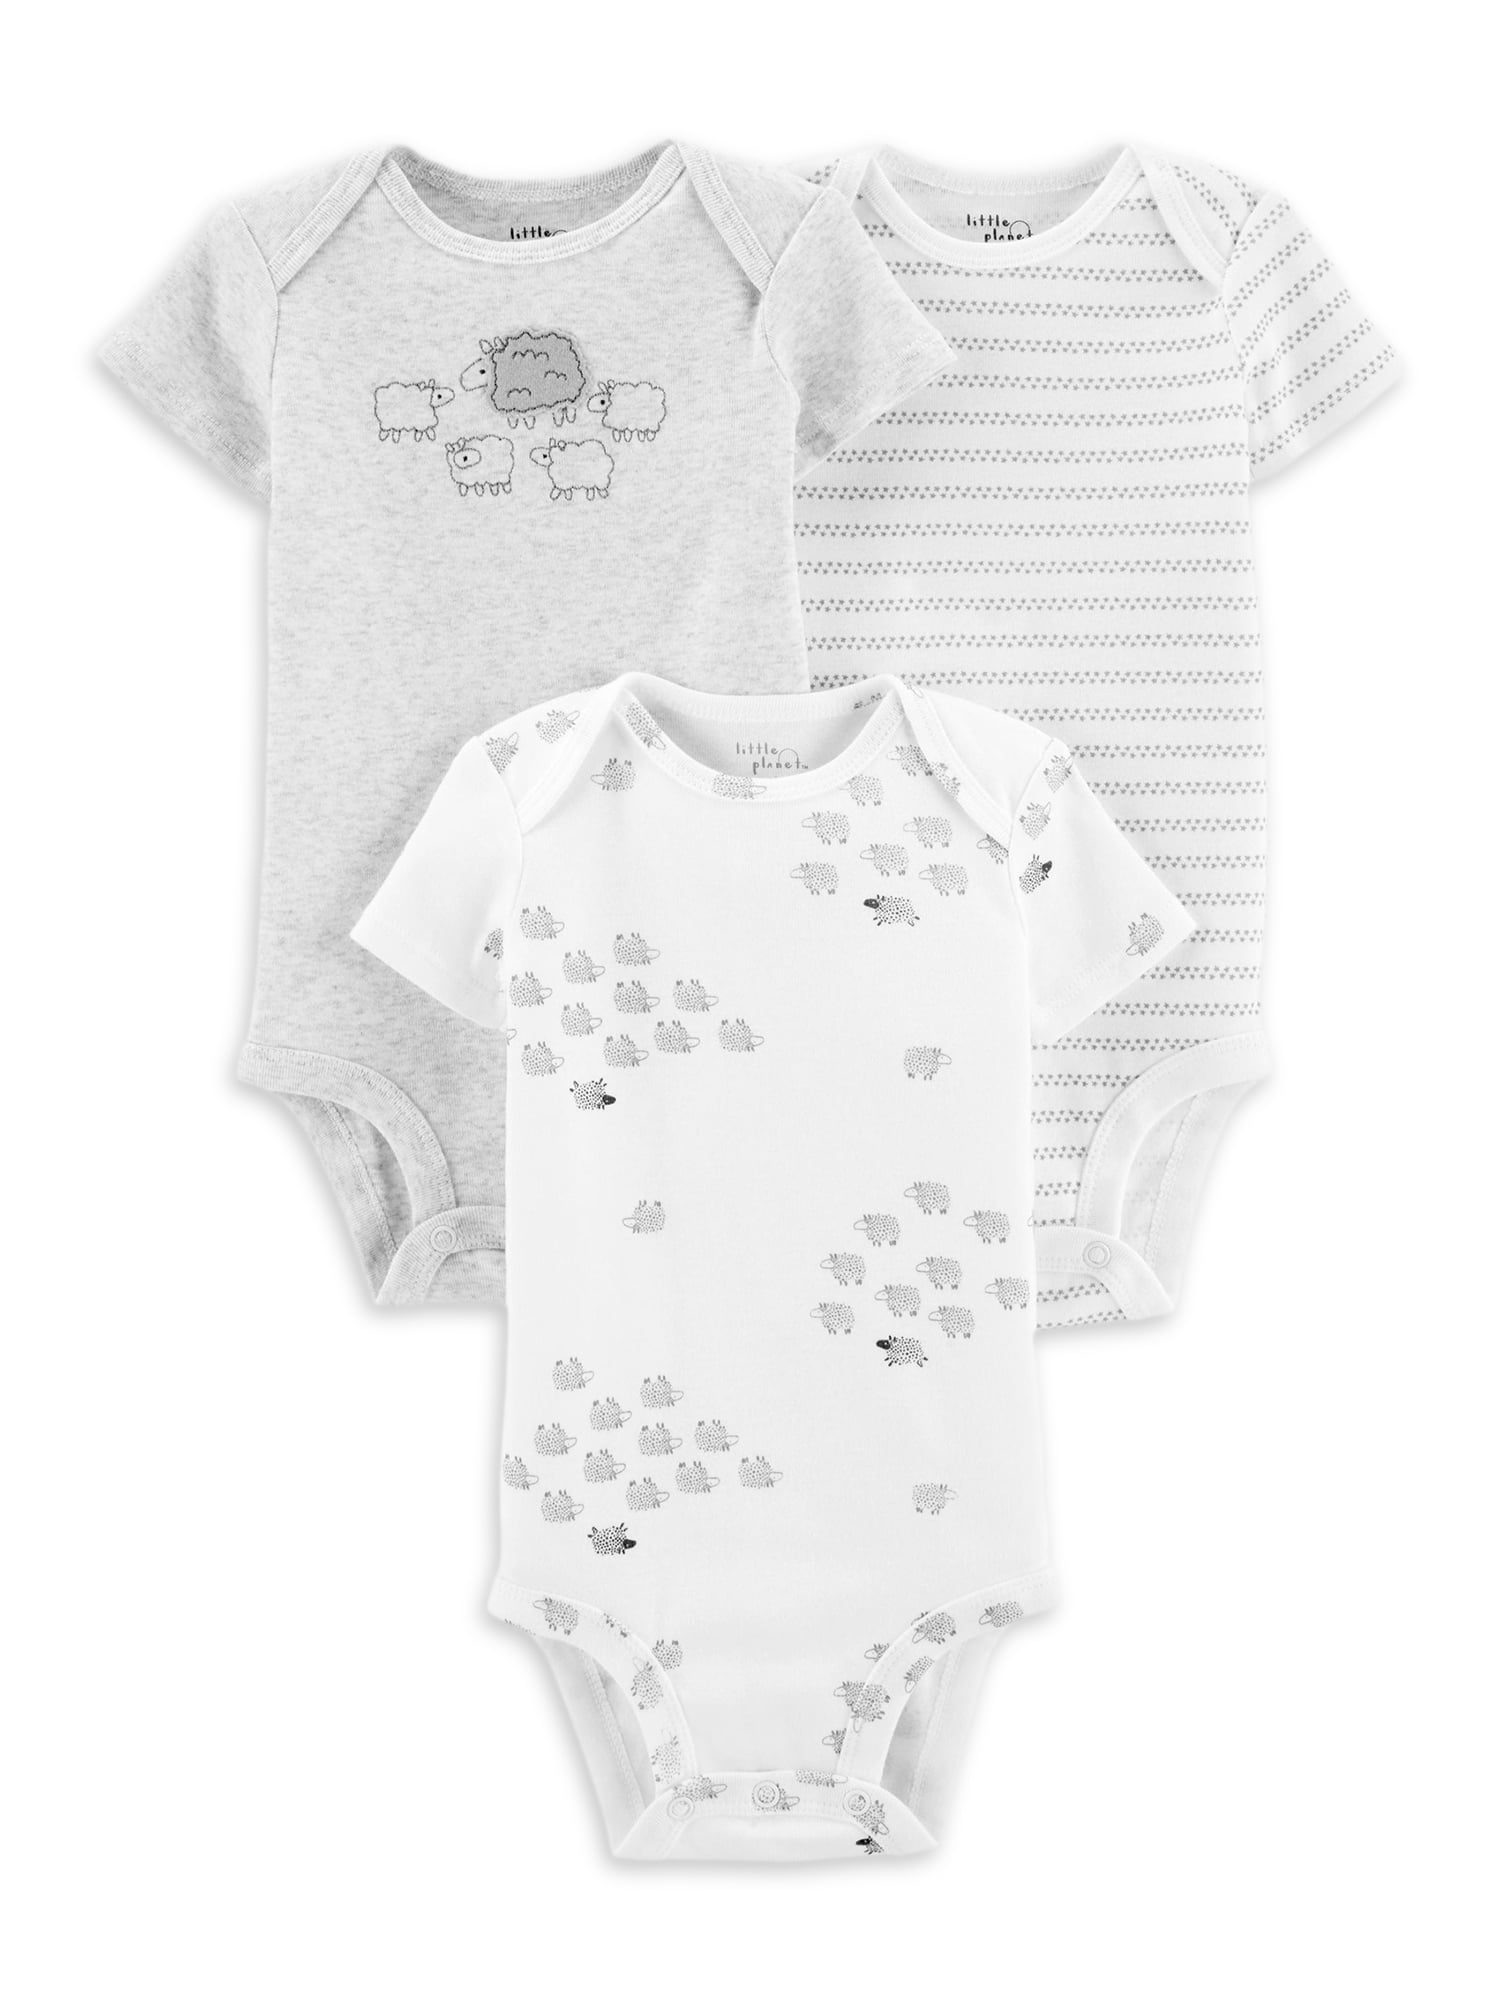 Gender Neutral Bodysuit or tshirt Wildlife ZOO DAY Bee Baby Clothes Animals Baby boy or baby girl.